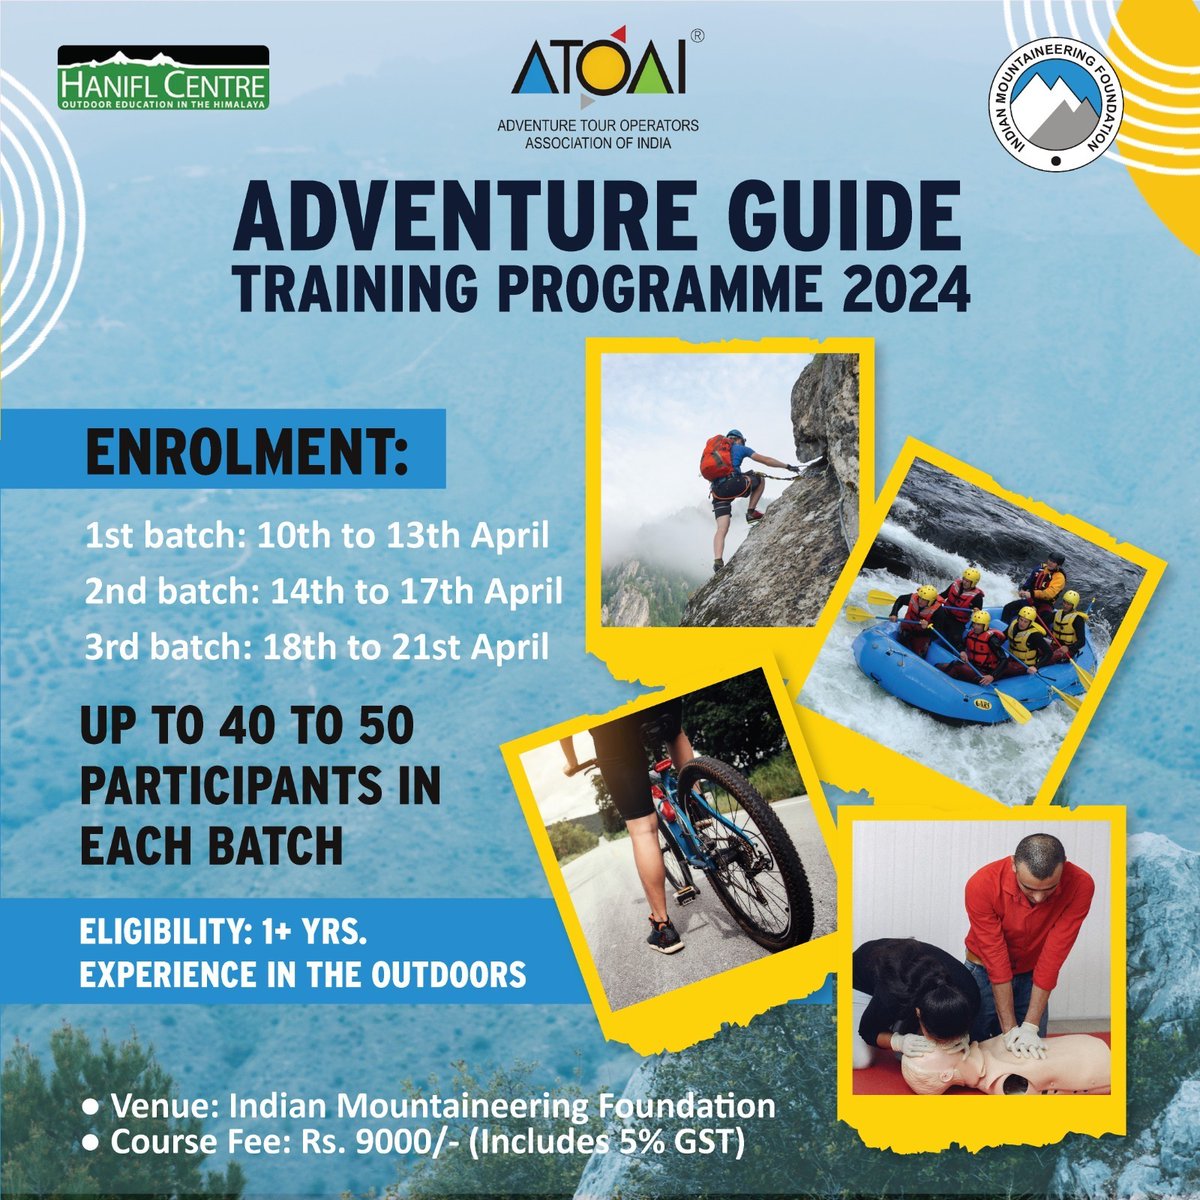 With just 24 hours left until Batch 1 of our Adventure Guide Training Program kicks off. You still have the chance to embark on your adventure guide journey with batches 2 and 3! 🔗Register here: forms.gle/gDYNuj2QbDkt5f… #AdventureTraining #ProfessionalDevelopment #ATOAI